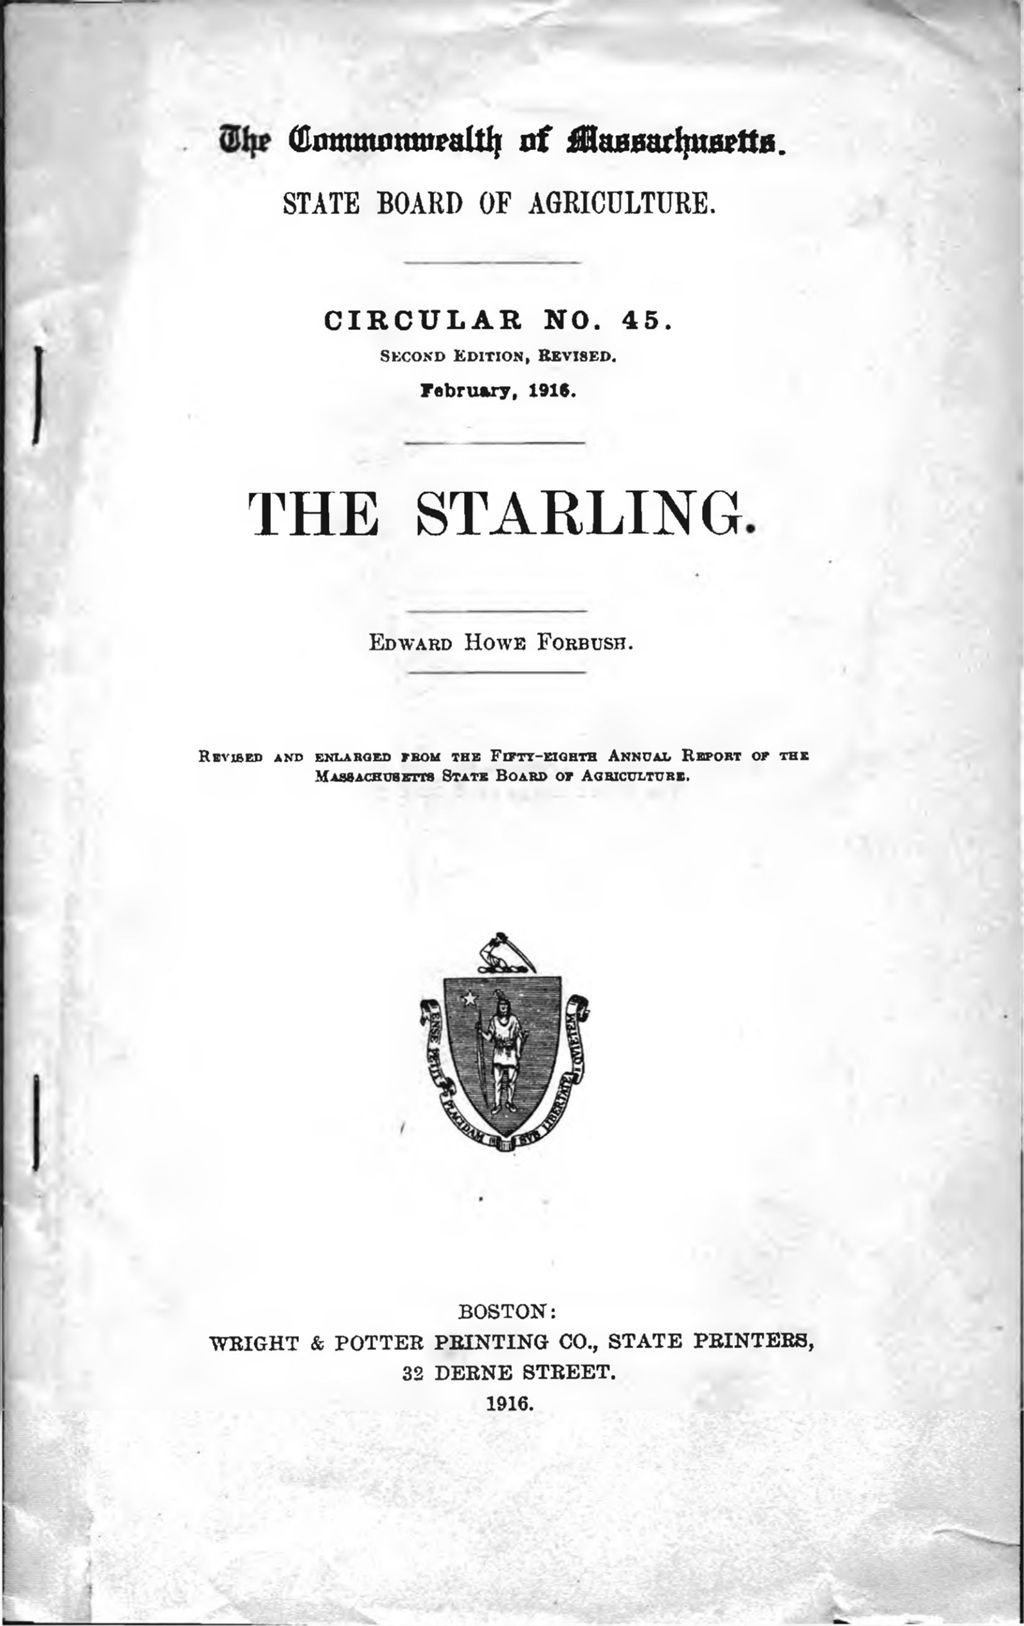 Miniature of Massachusetts State Board of Agriculture Circular no. 45. The Starling, 1916